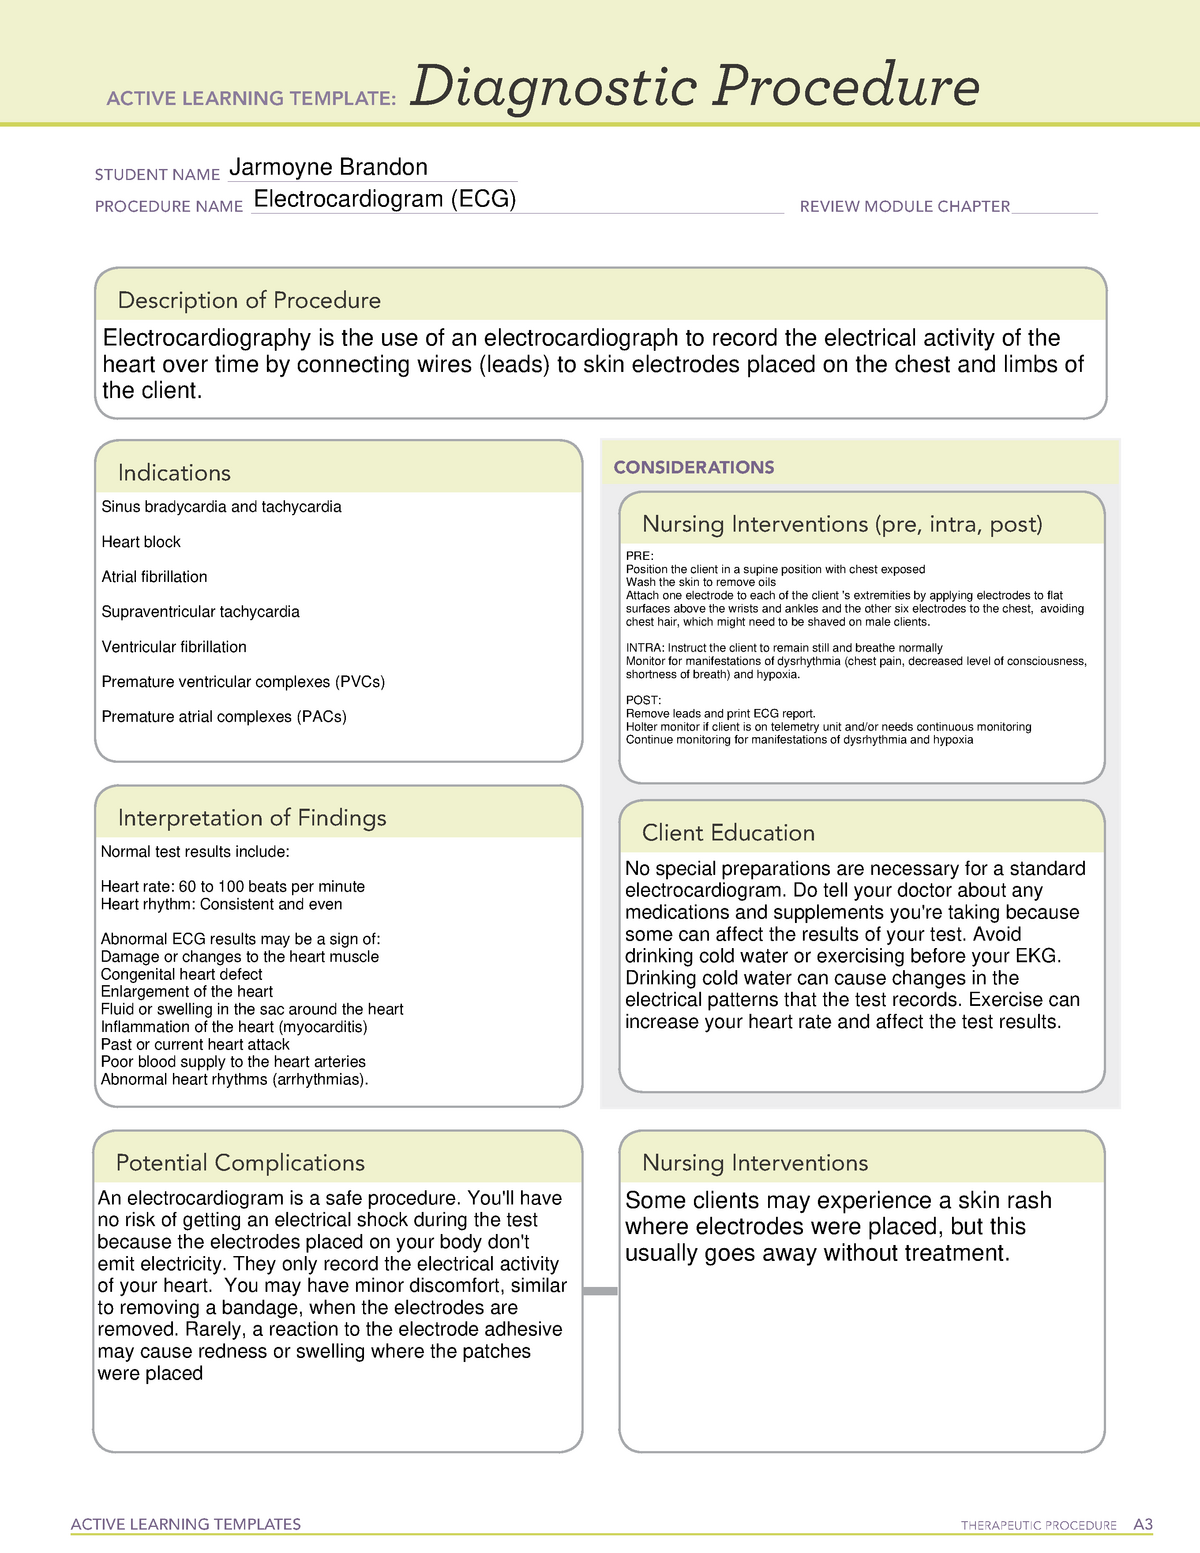 PN II Clinical Diagnostic Procedure ECG - ACTIVE LEARNING TEMPLATES ...